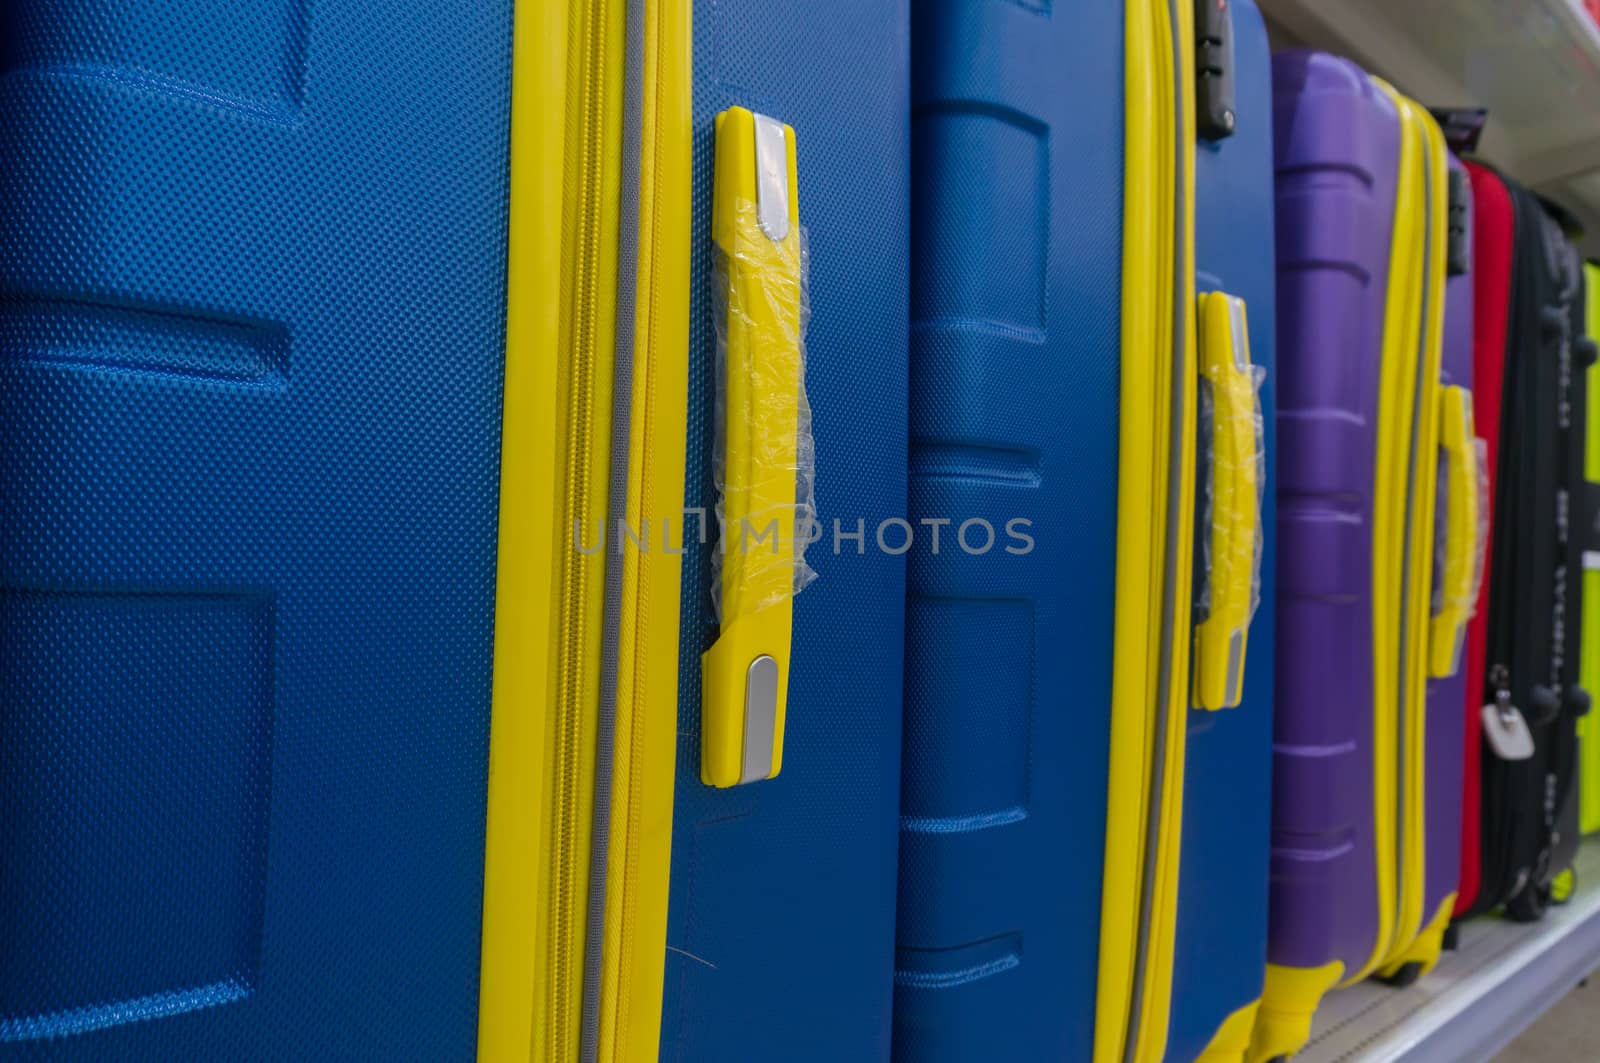 Blue and Yellow suitcases or Travel Bag in a row on shelf in Hypermarket, Shallow Depth of Field.